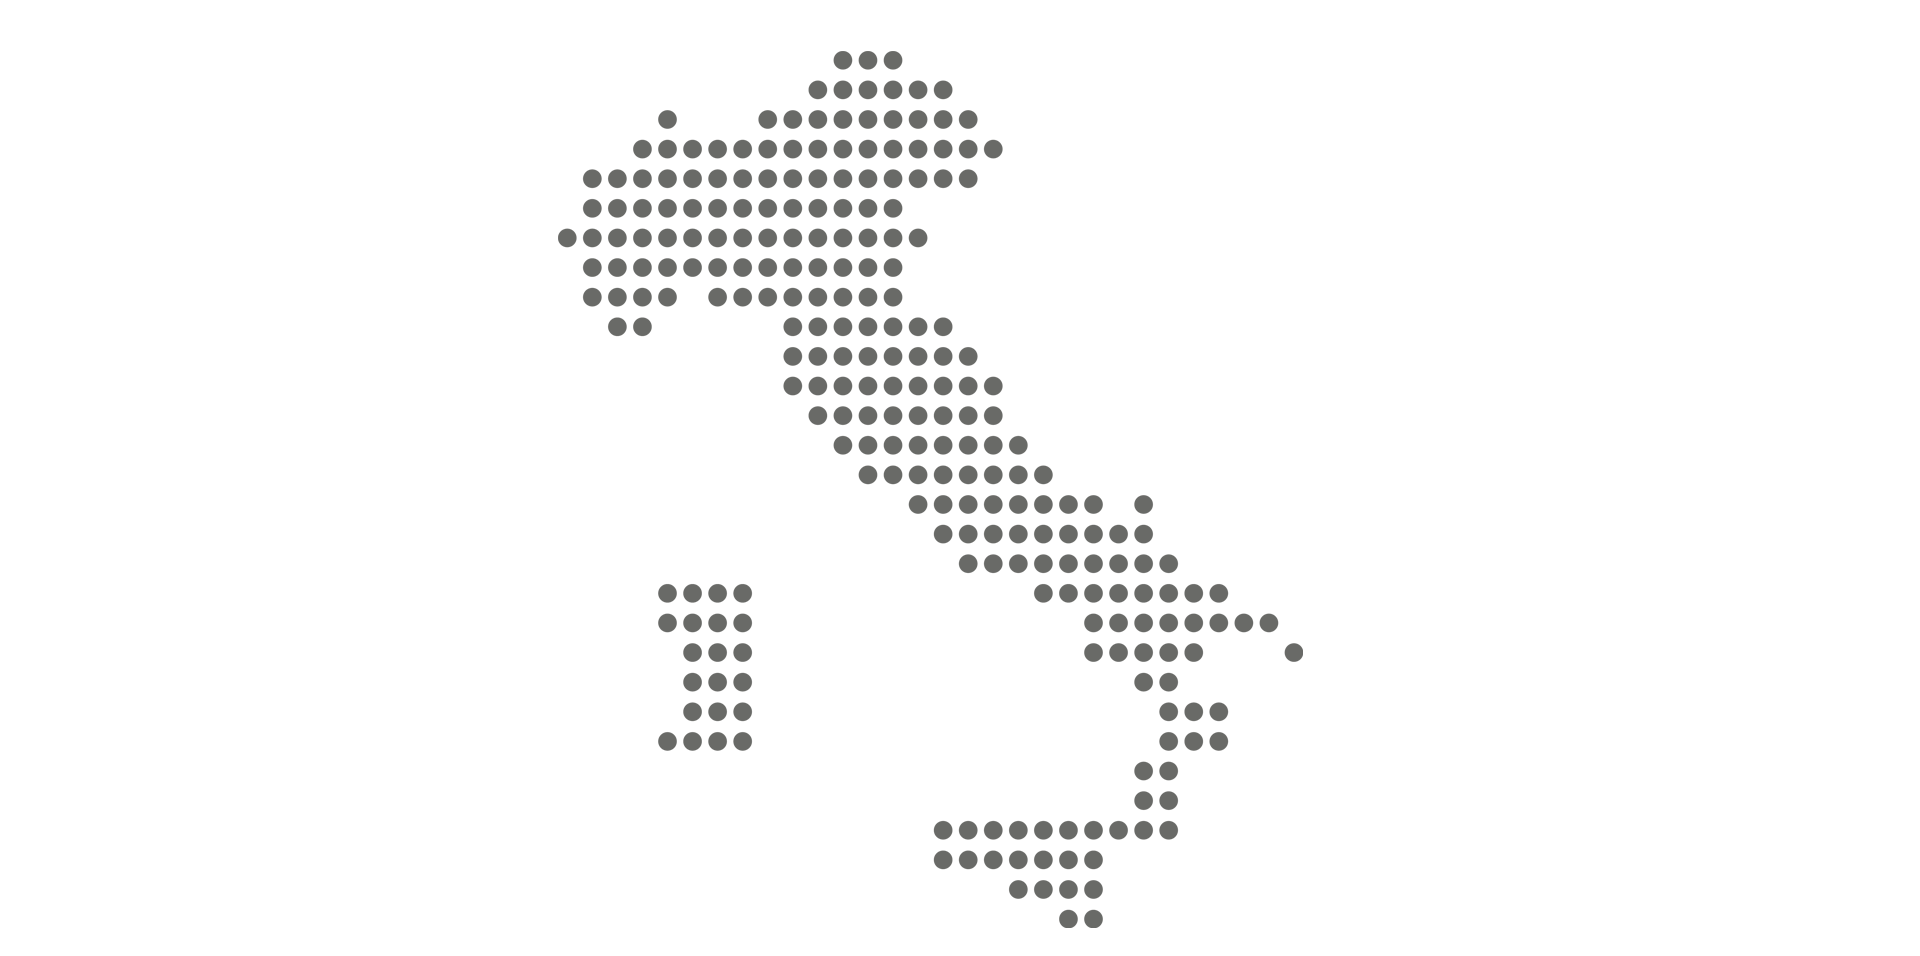 map-italy.png